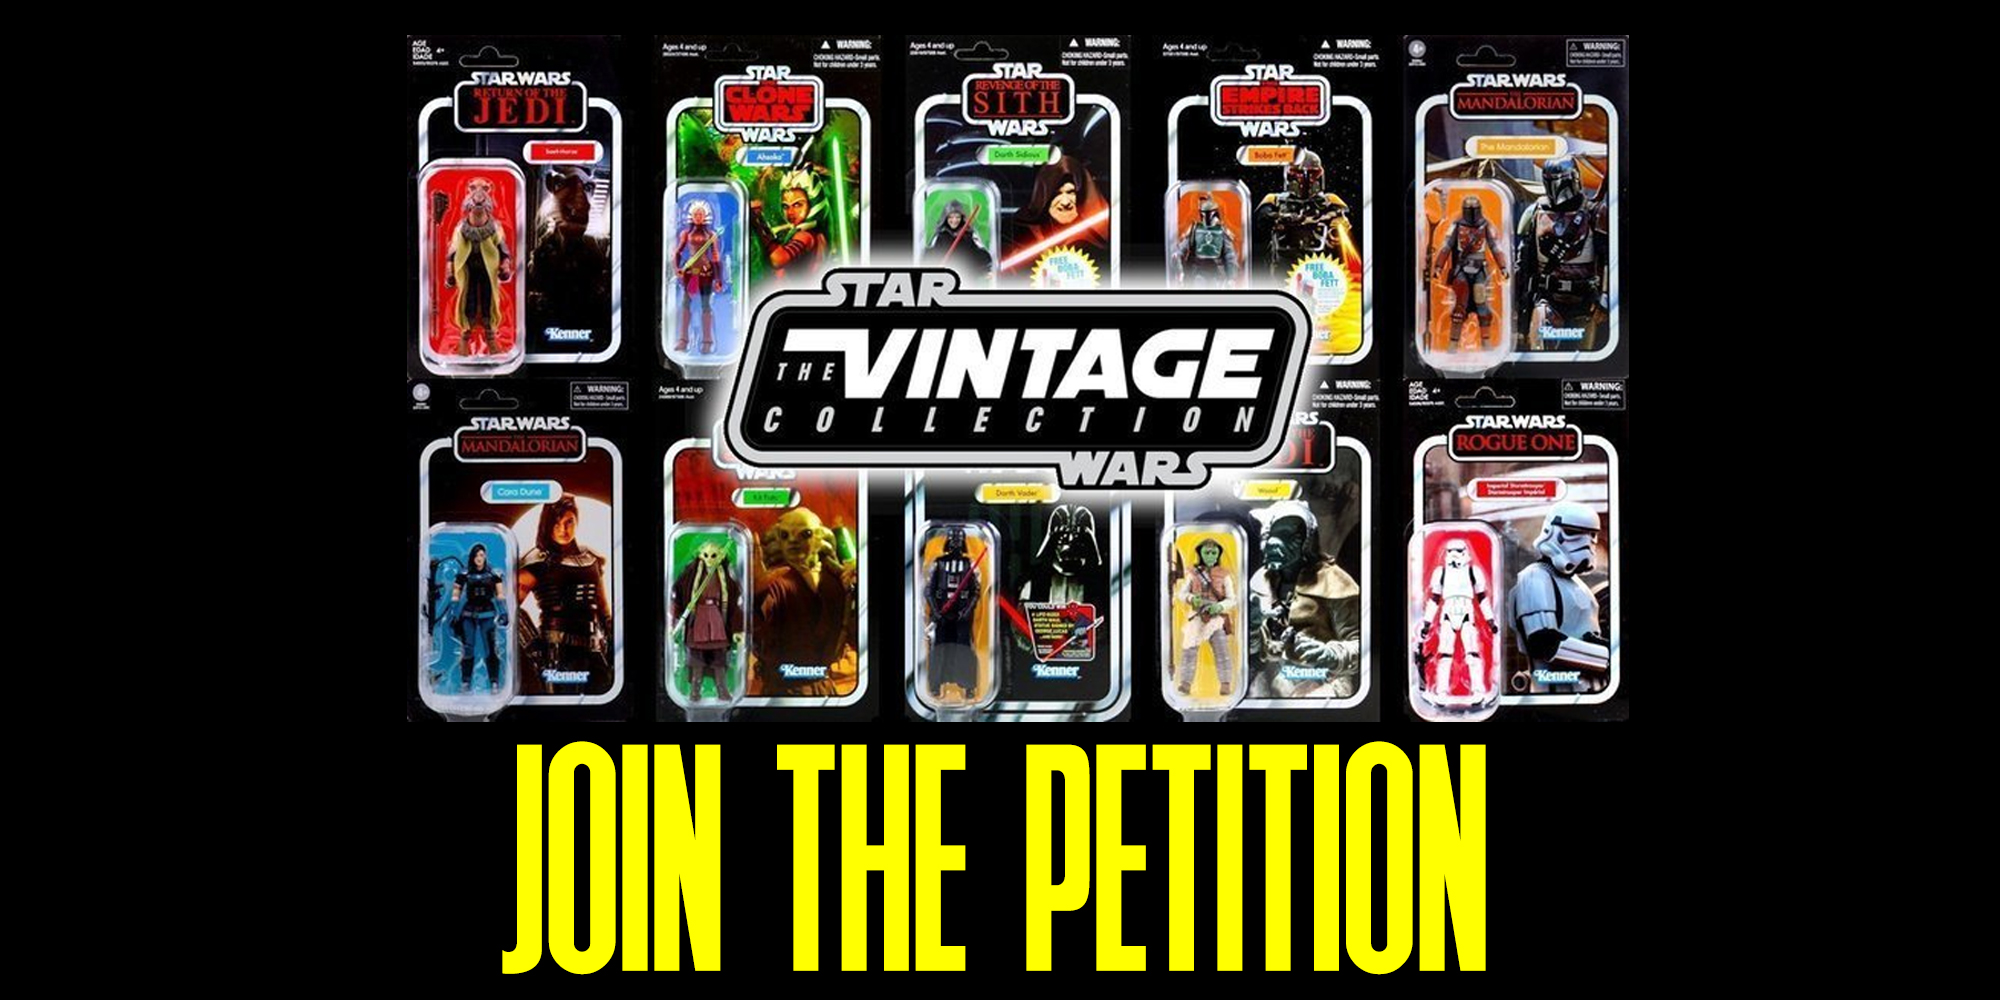 Star Wars The Vintage Collection Petition